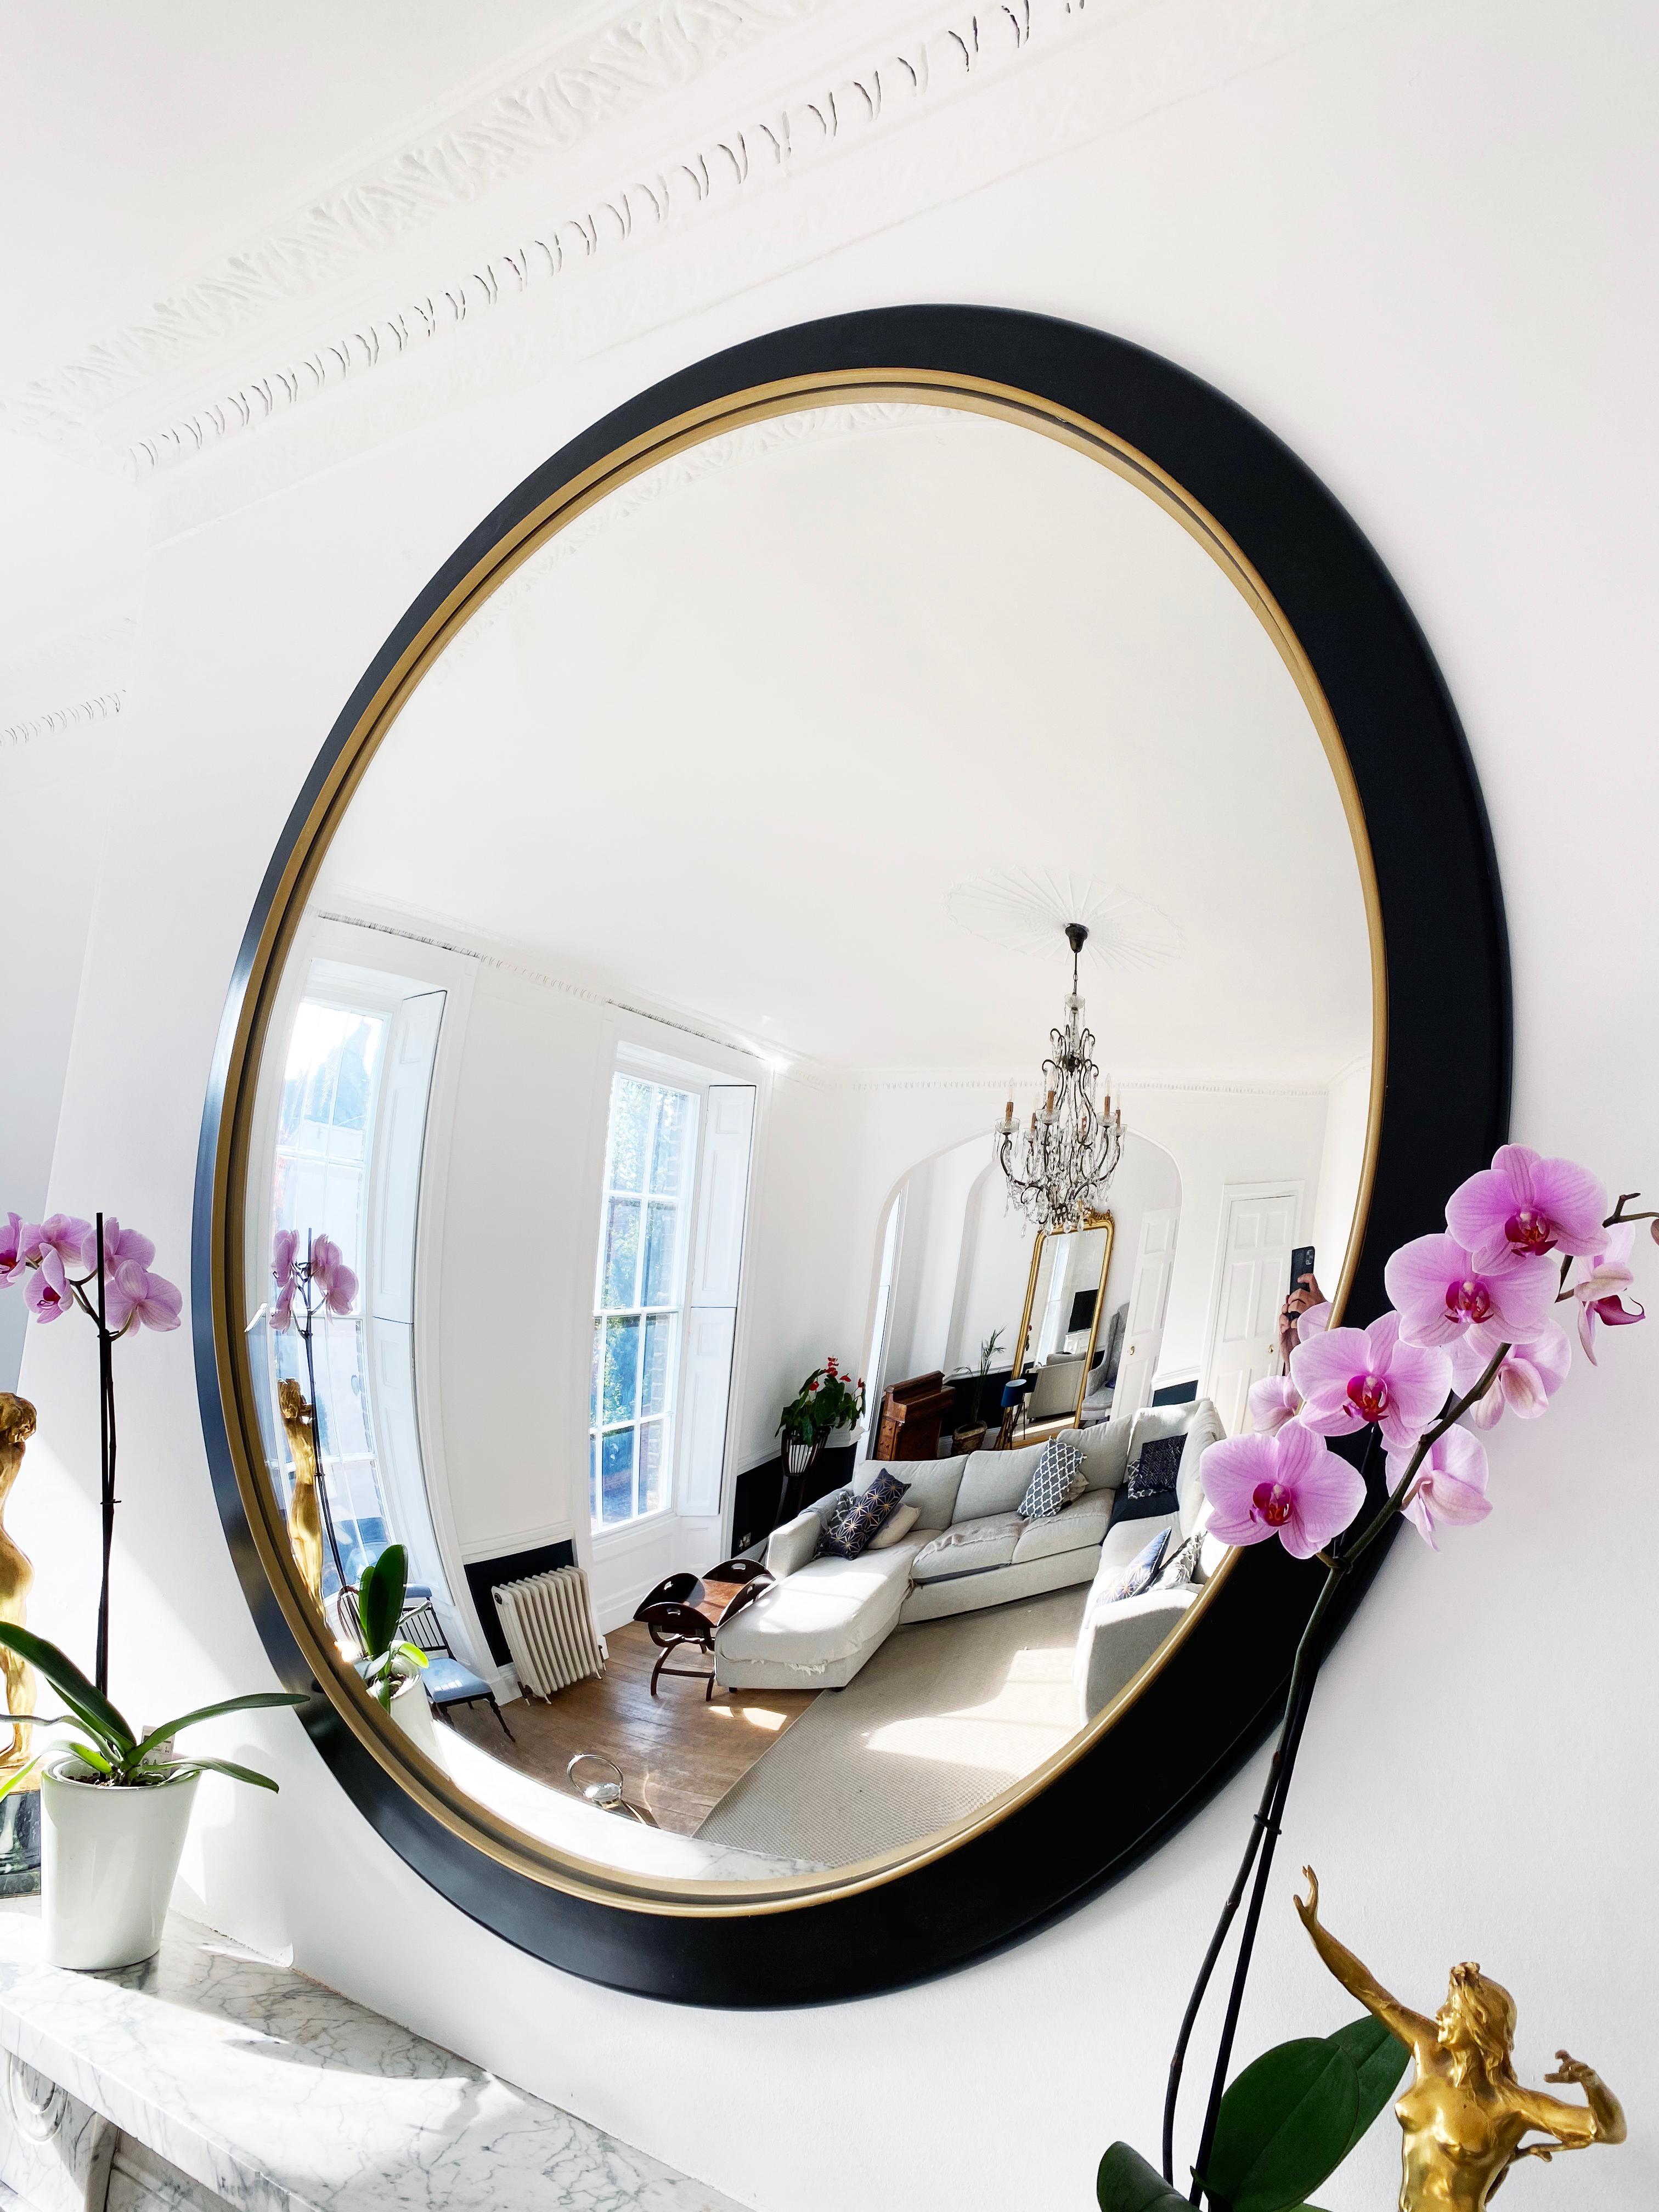 The Stilo Nero is a highly decorative convex wall mirror that creates a focal point and adds elegance to any room. The mirror itself is silvered using traditional methods and fabricated from 6mm low iron glass with a curvature of 8 cms. The overall